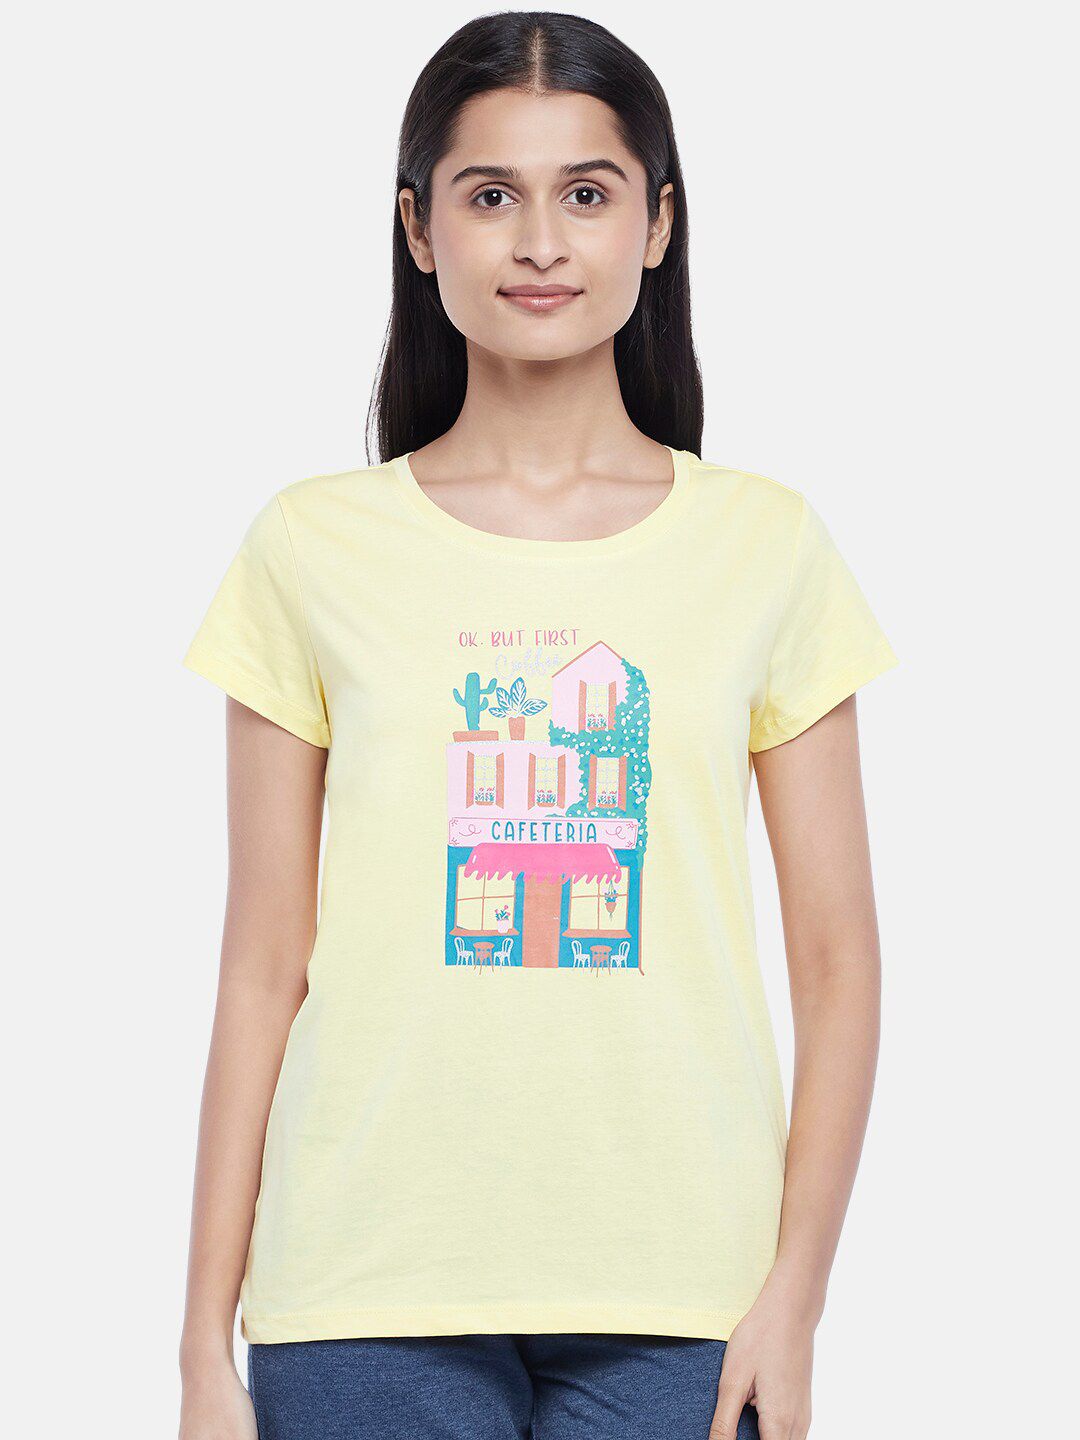 Dreamz by Pantaloons Yellow Printed Cotton Lounge tshirt Price in India